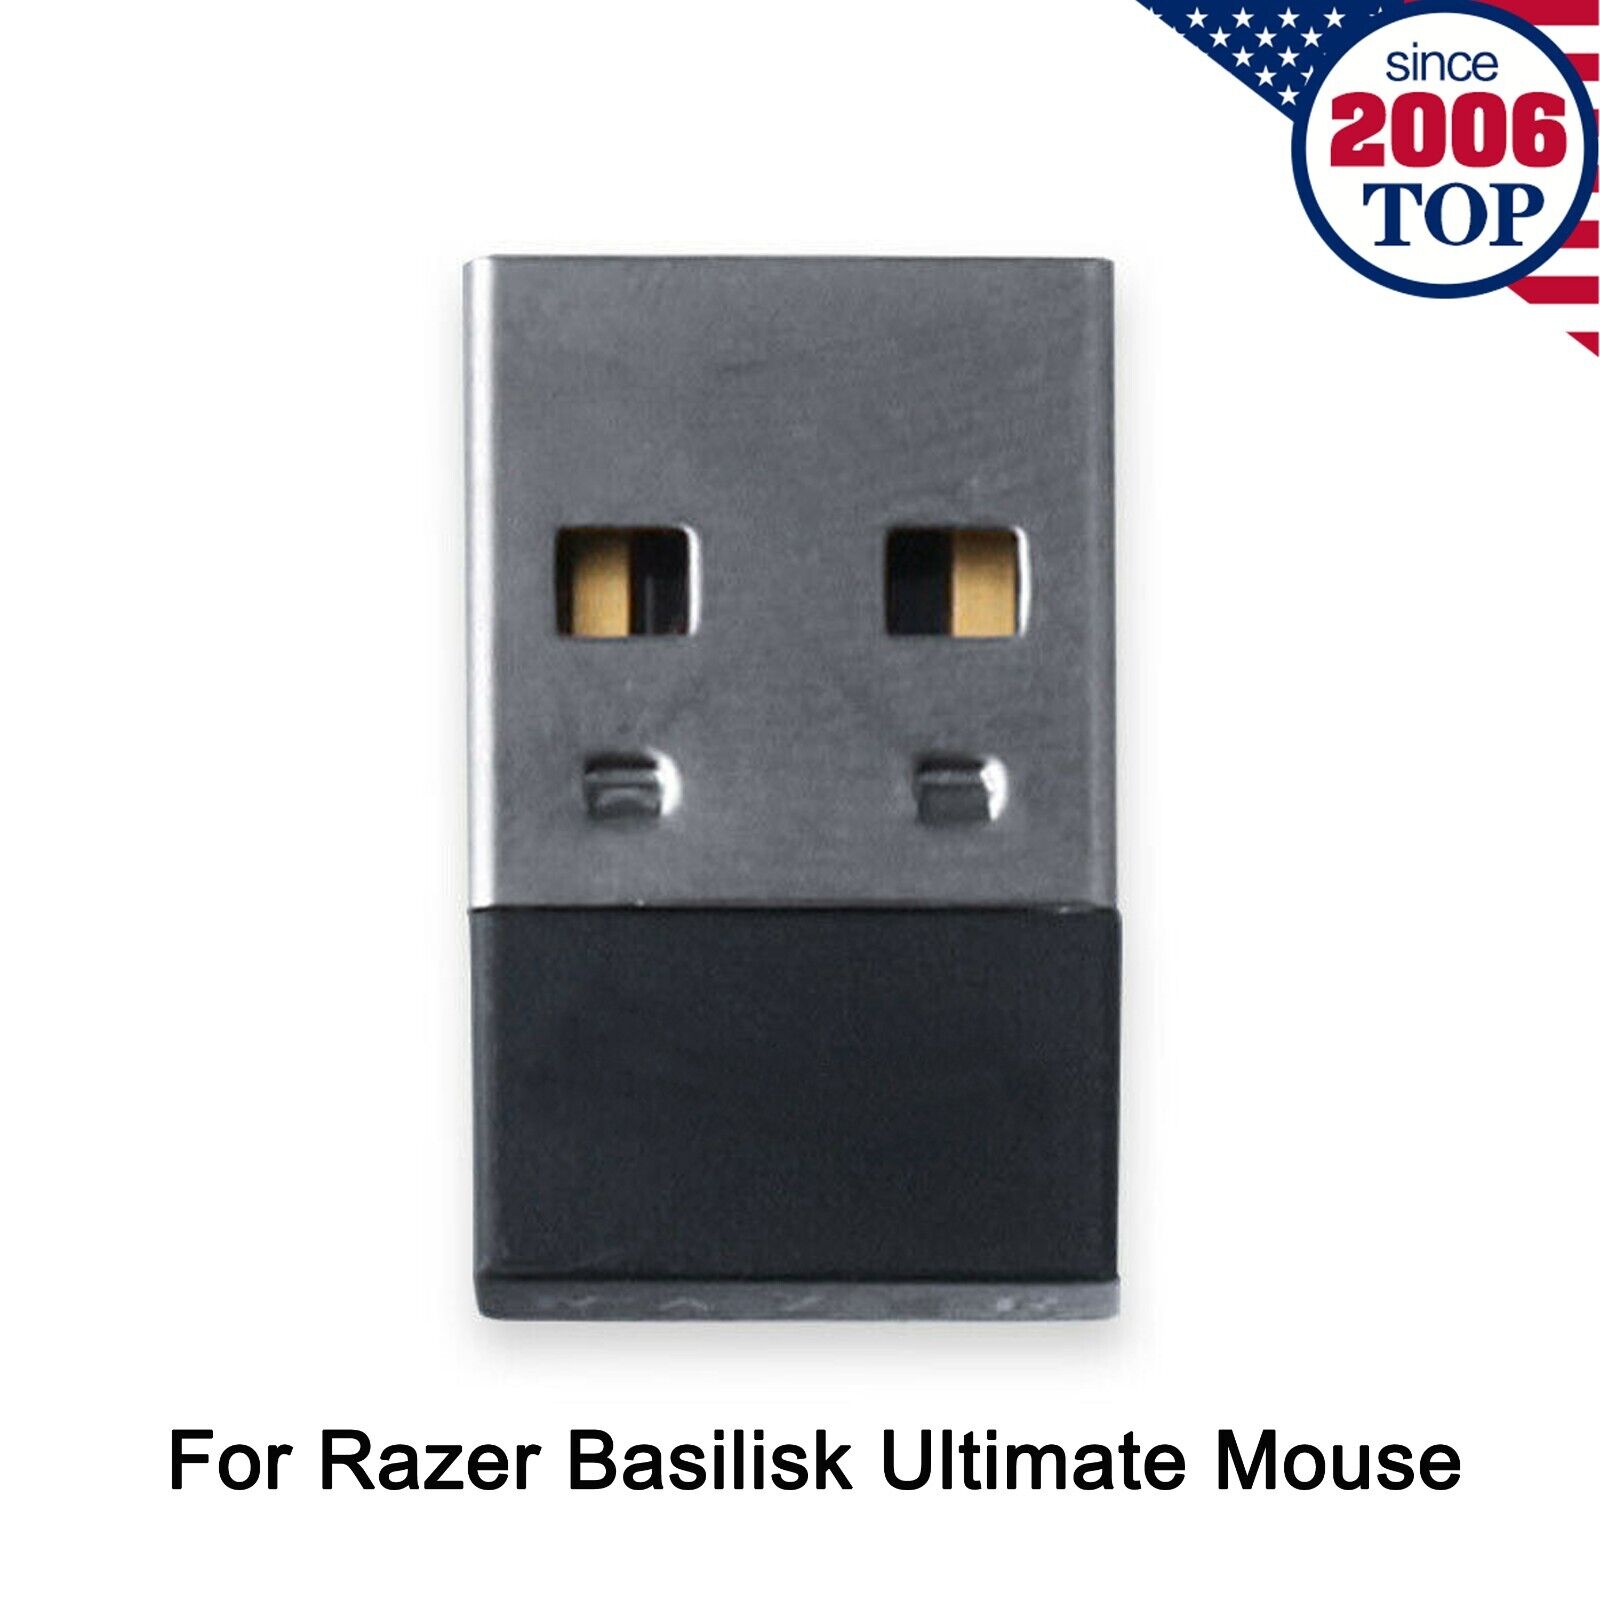 USB Mouse Receiver Adapter for Razer Basilisk Ultimate Wireless Gaming Mouse